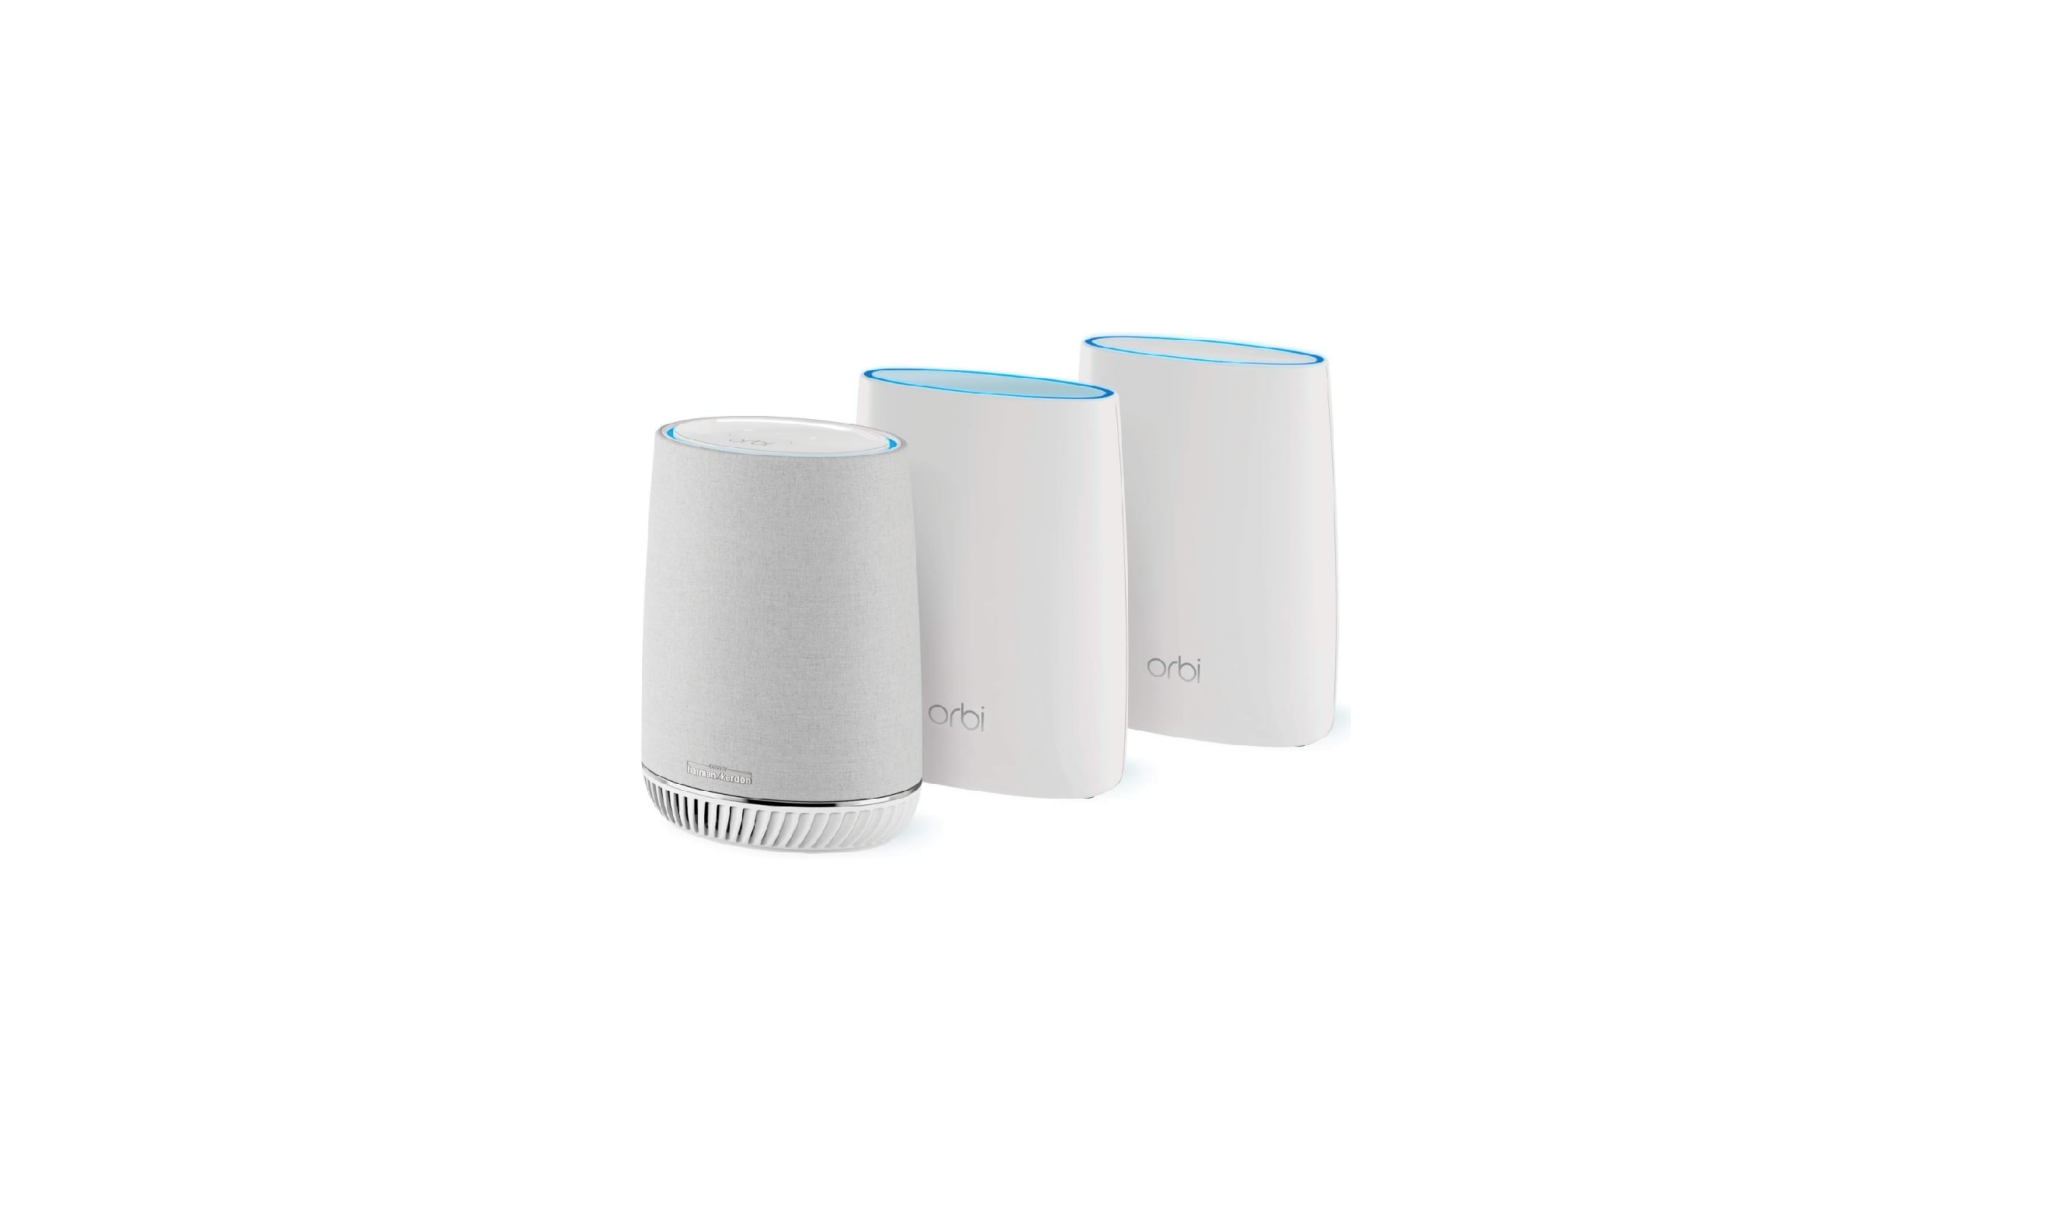 Orbi Voice Whole Home Mesh WiFi System - fastest WiFi router and satellite extender